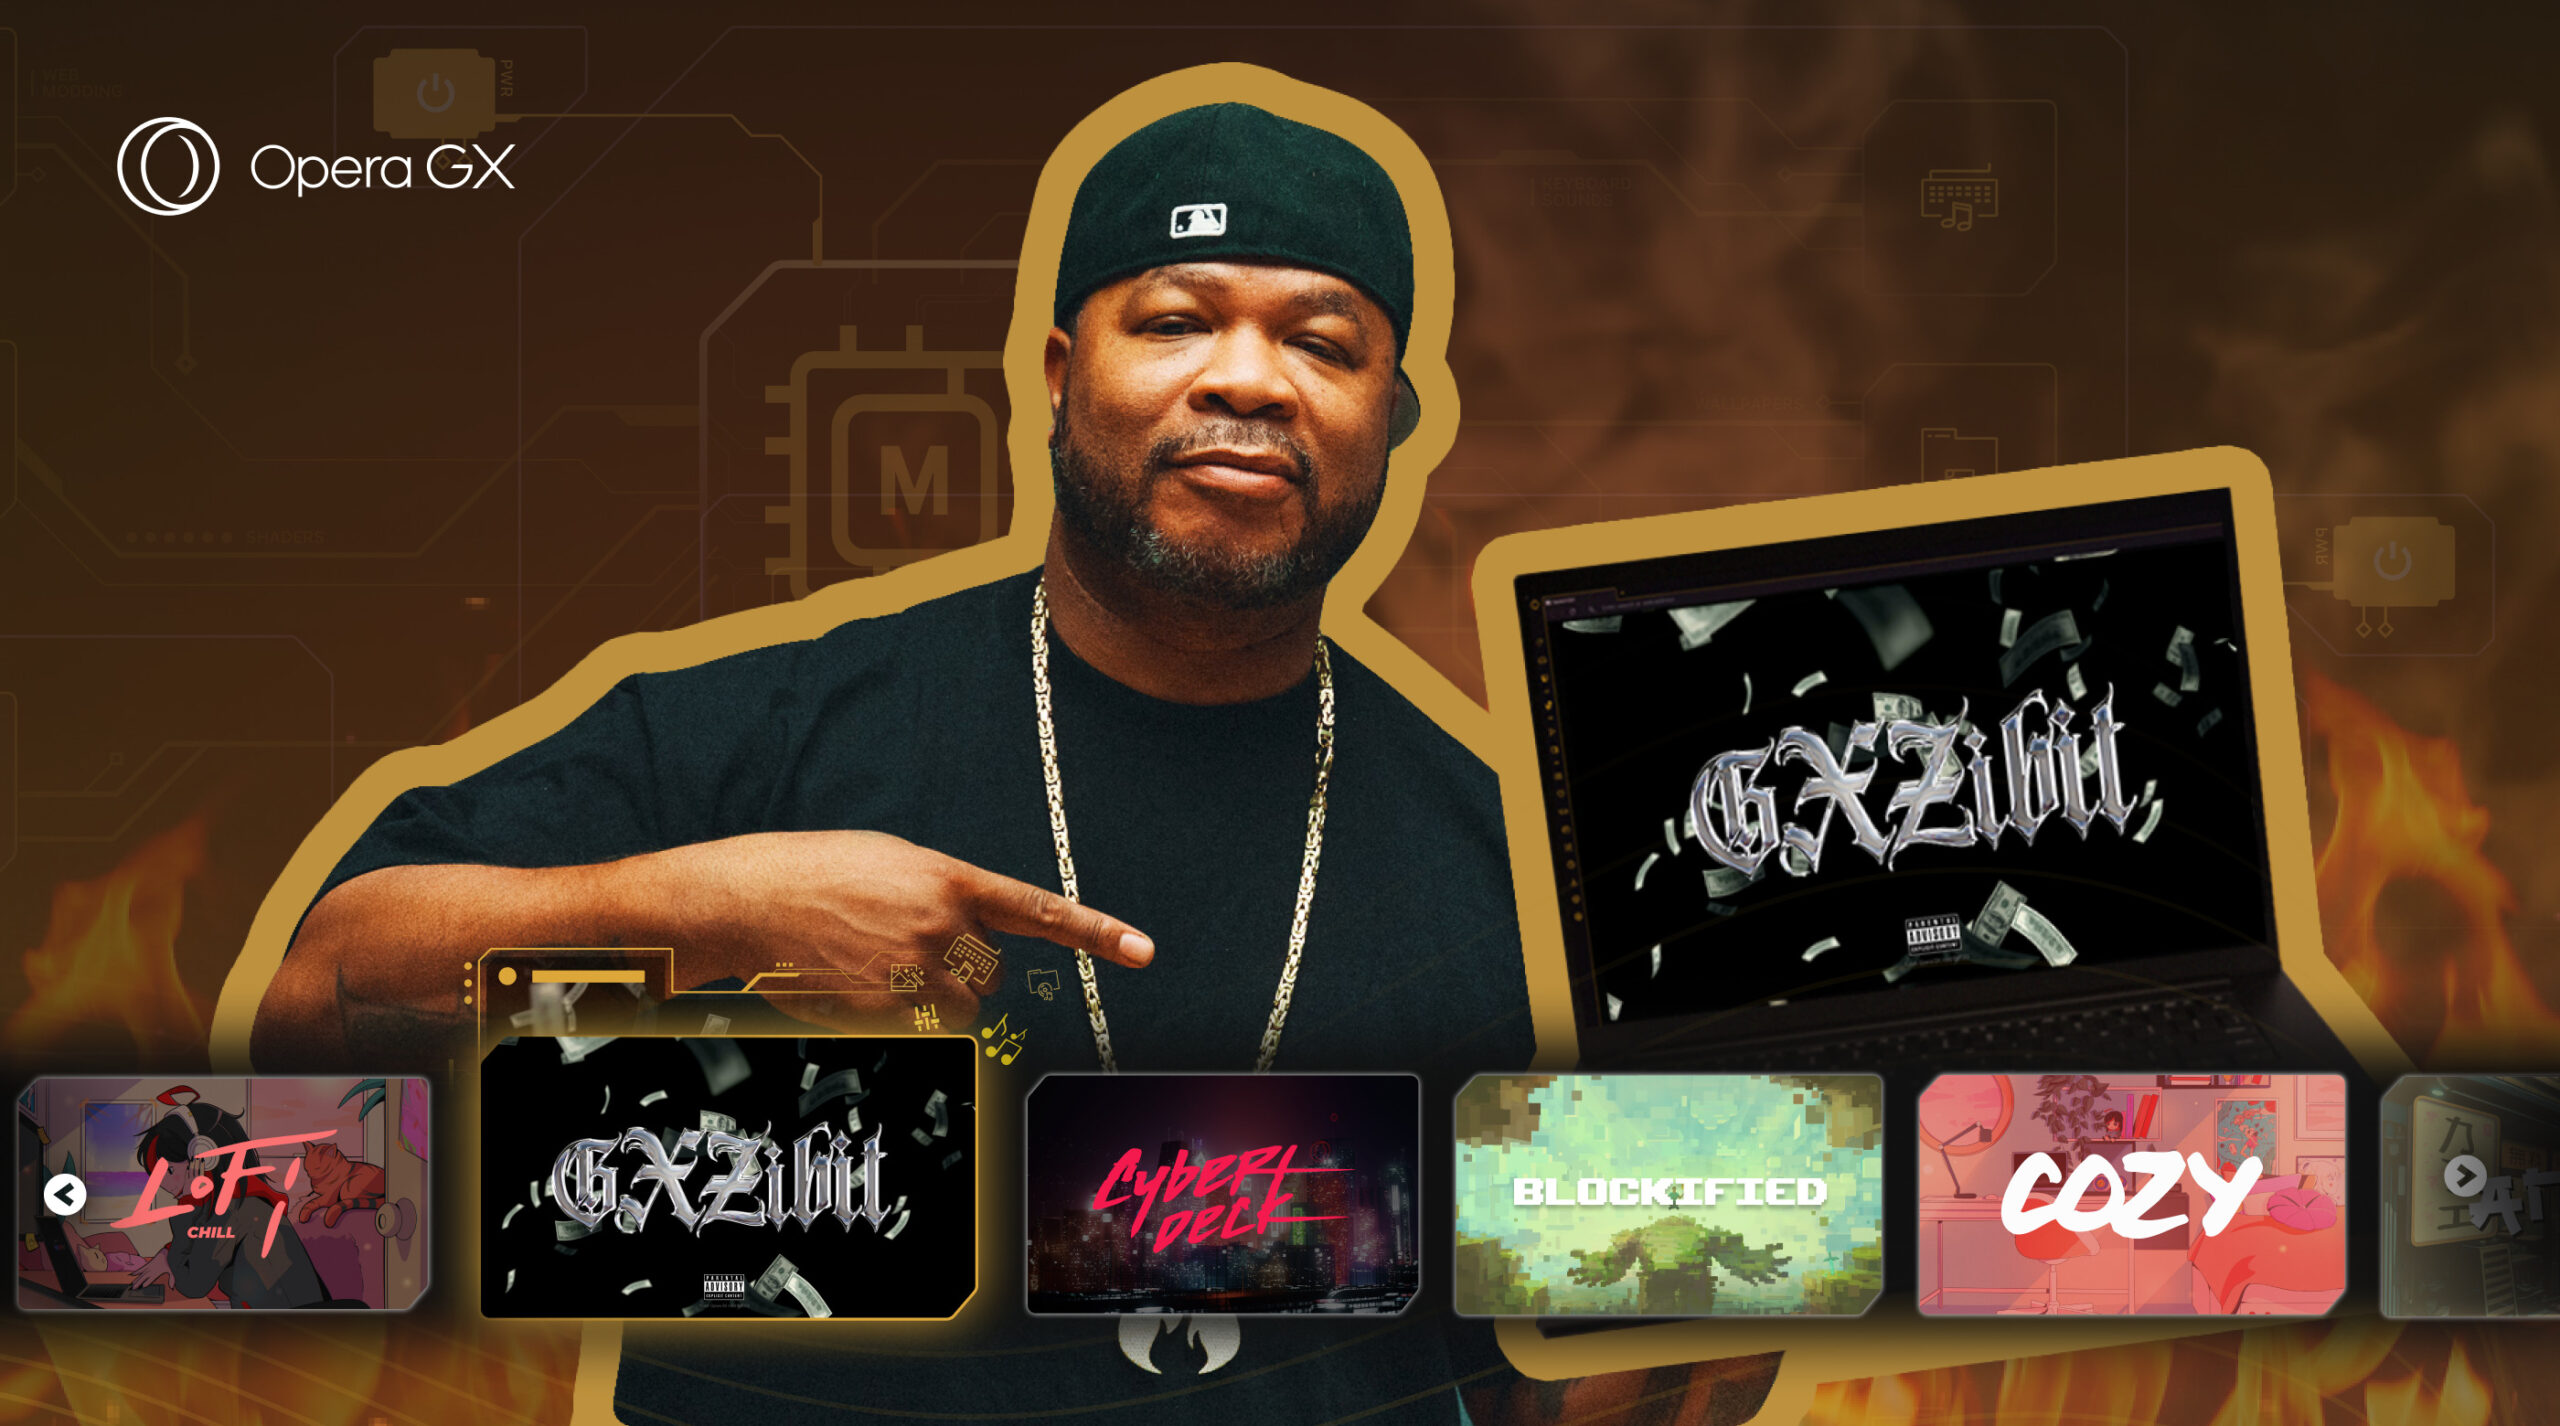 Rapper and TV show host Xzibit featuring his pimped browser.